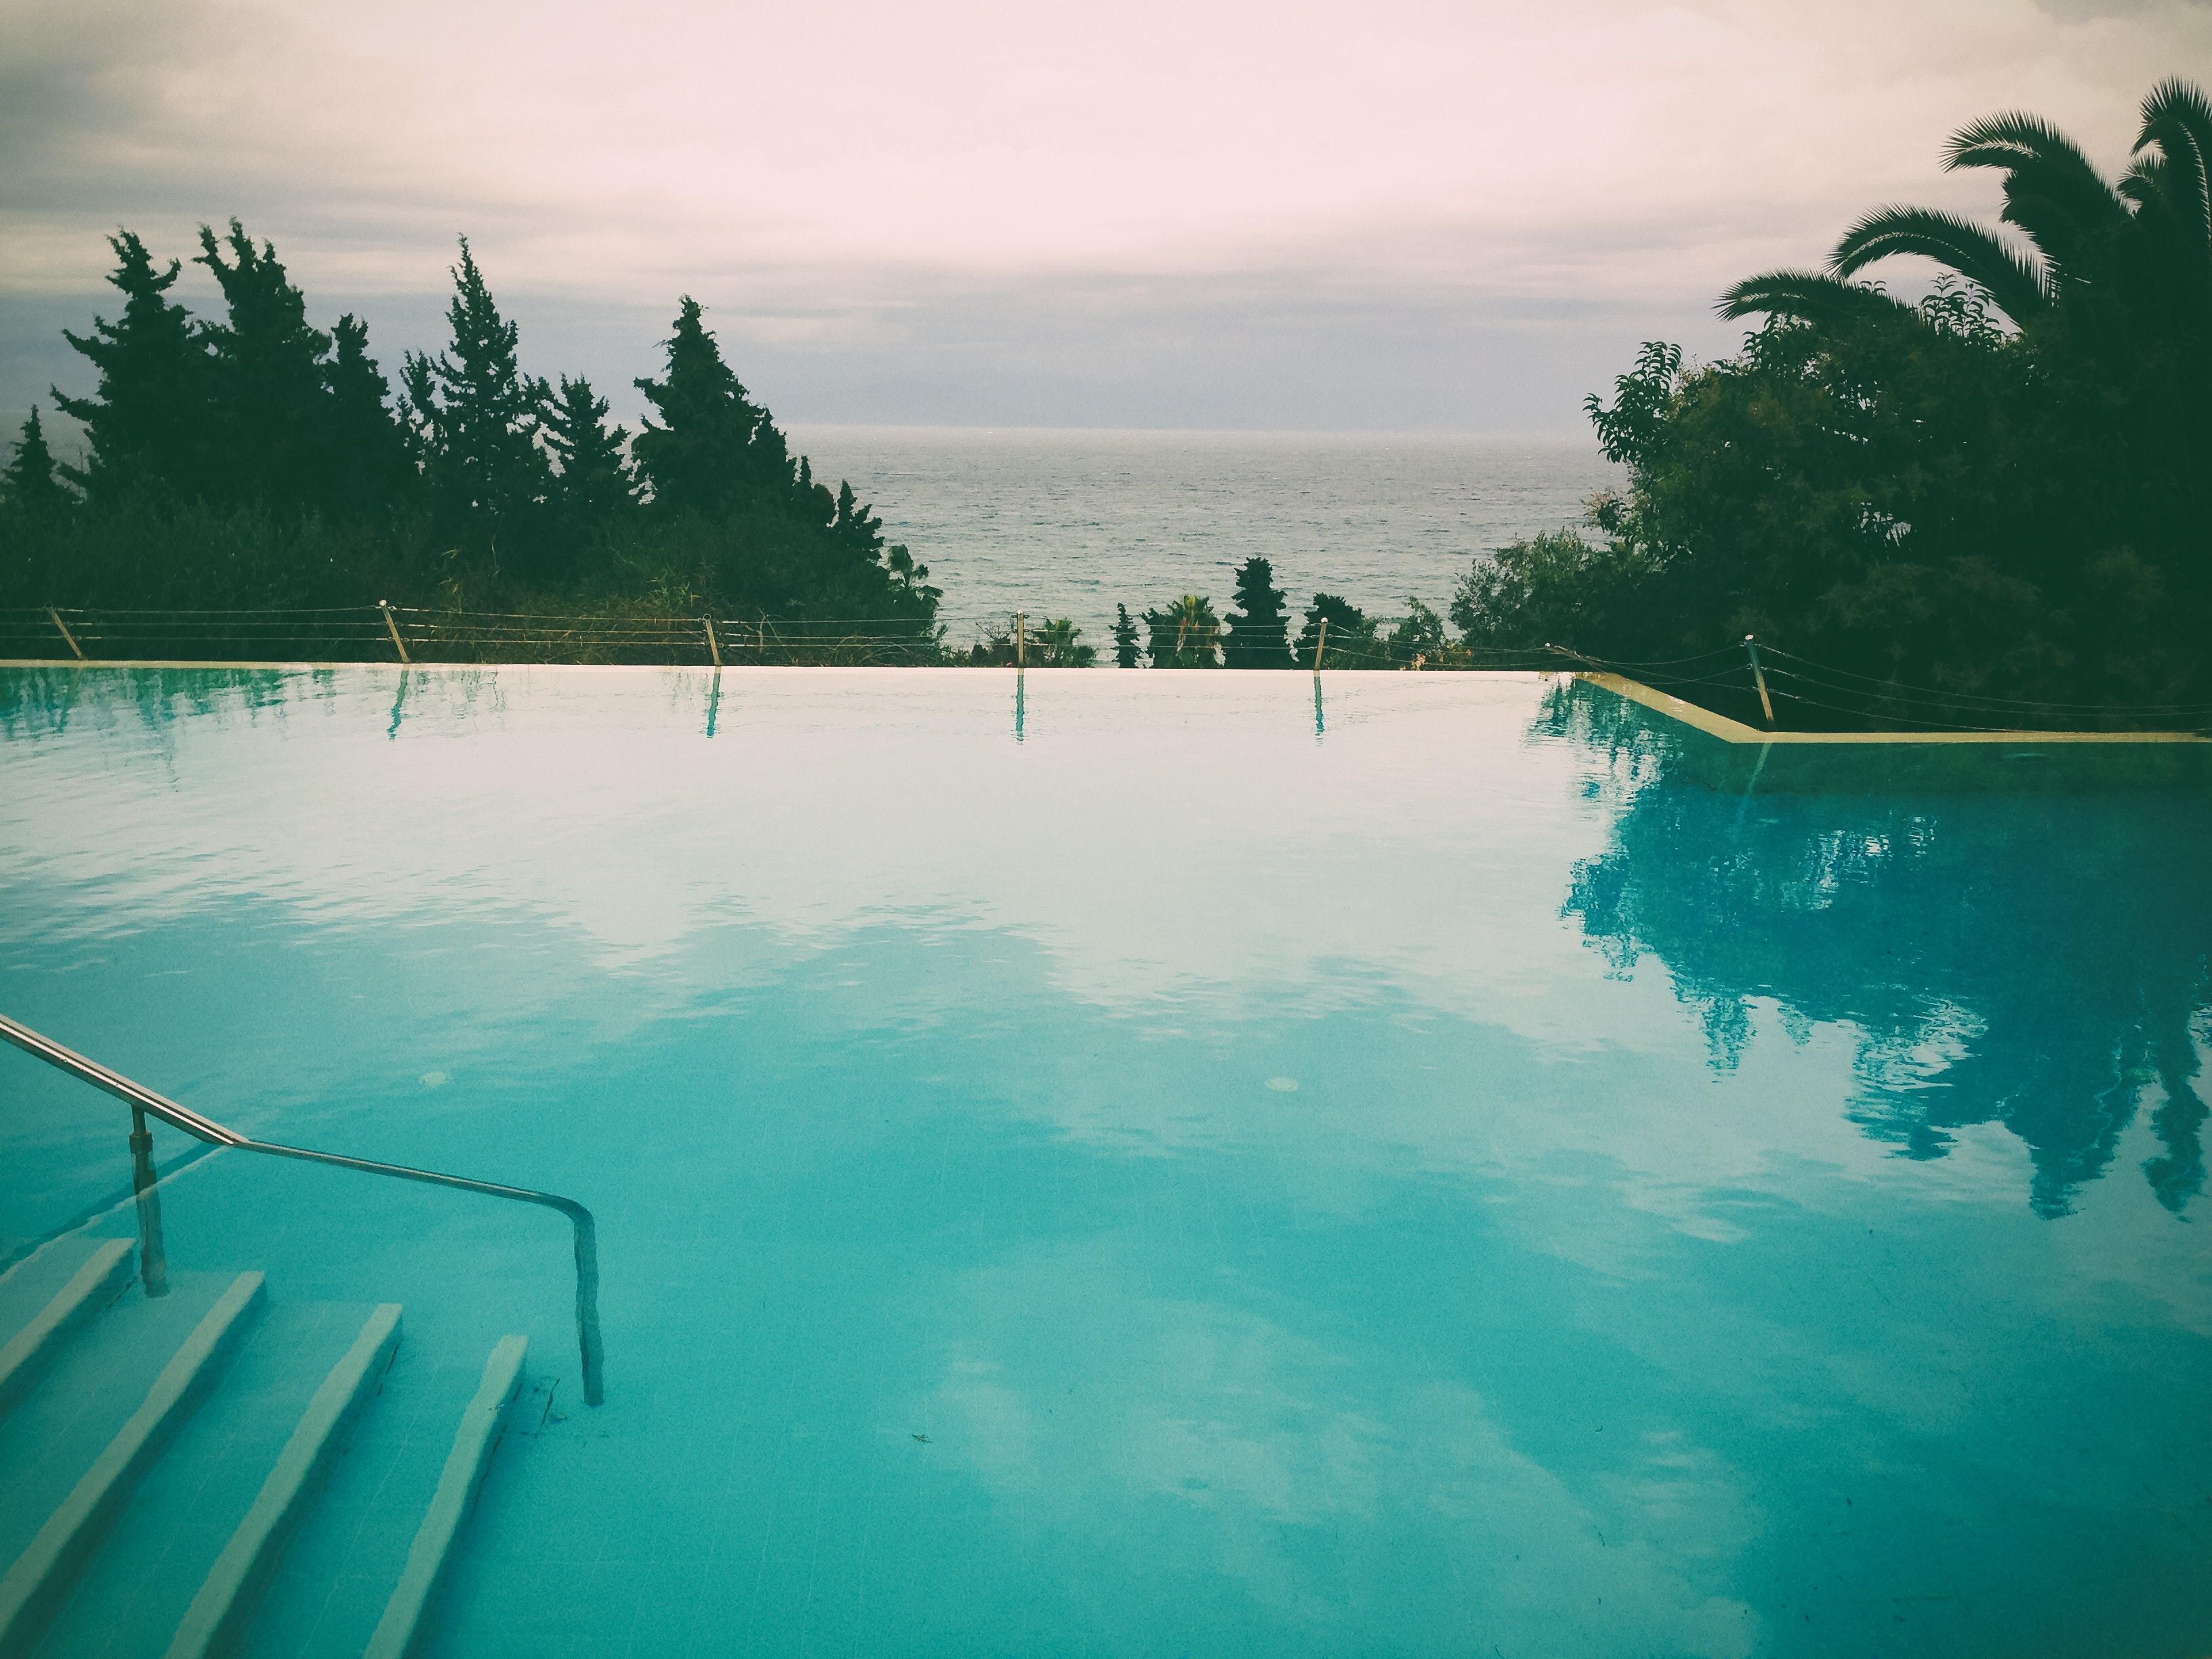 Swimming Pool, Bay, Seascape, Vacation, Tropical, HQ Photo